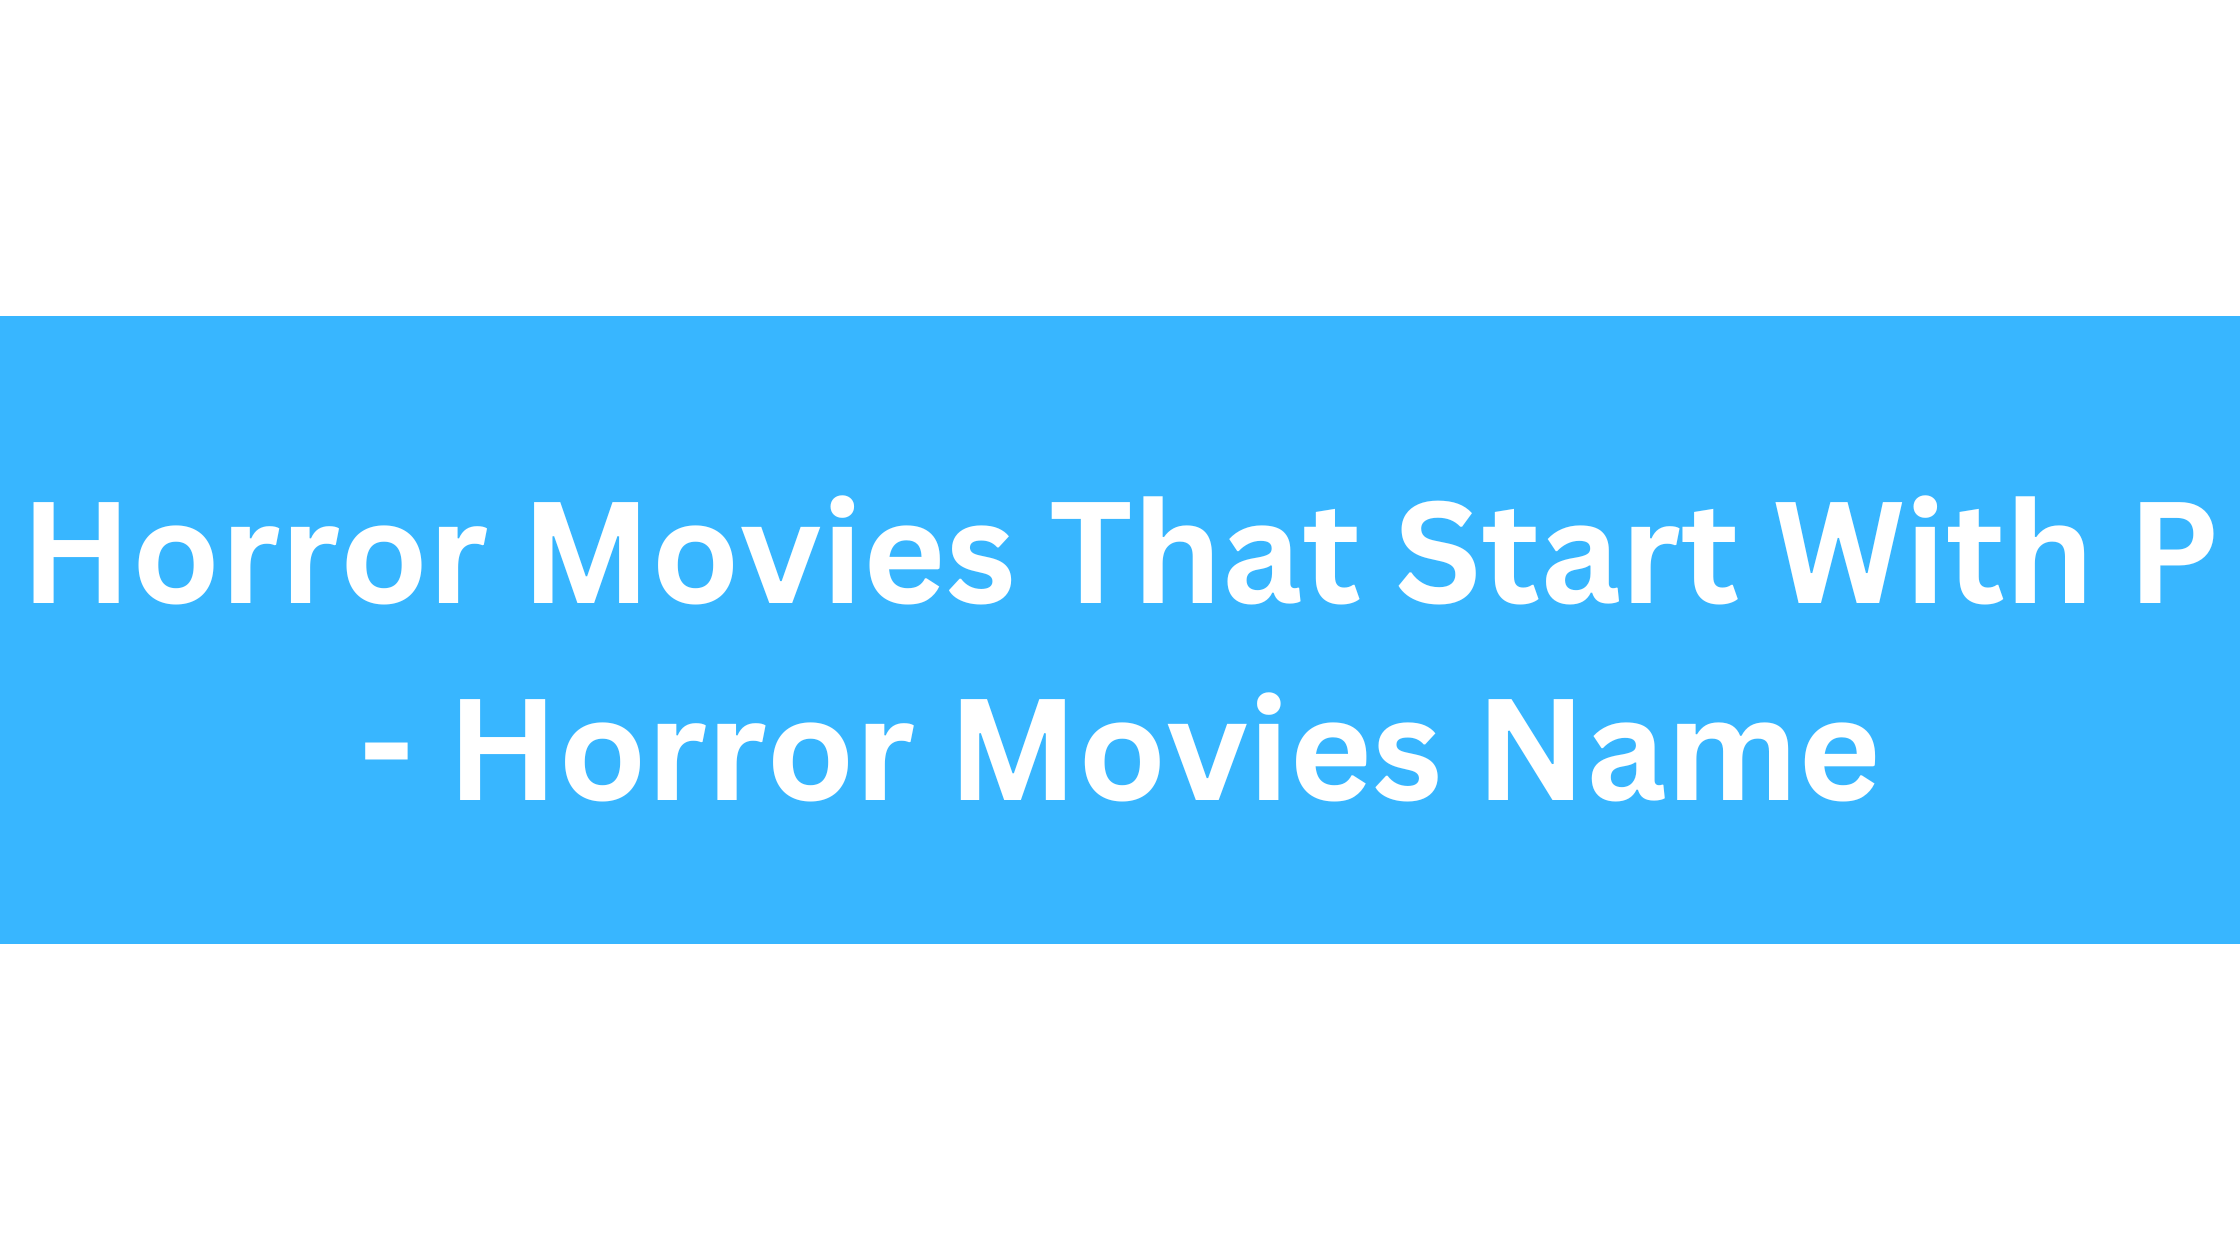 Horror Movies That Start With P